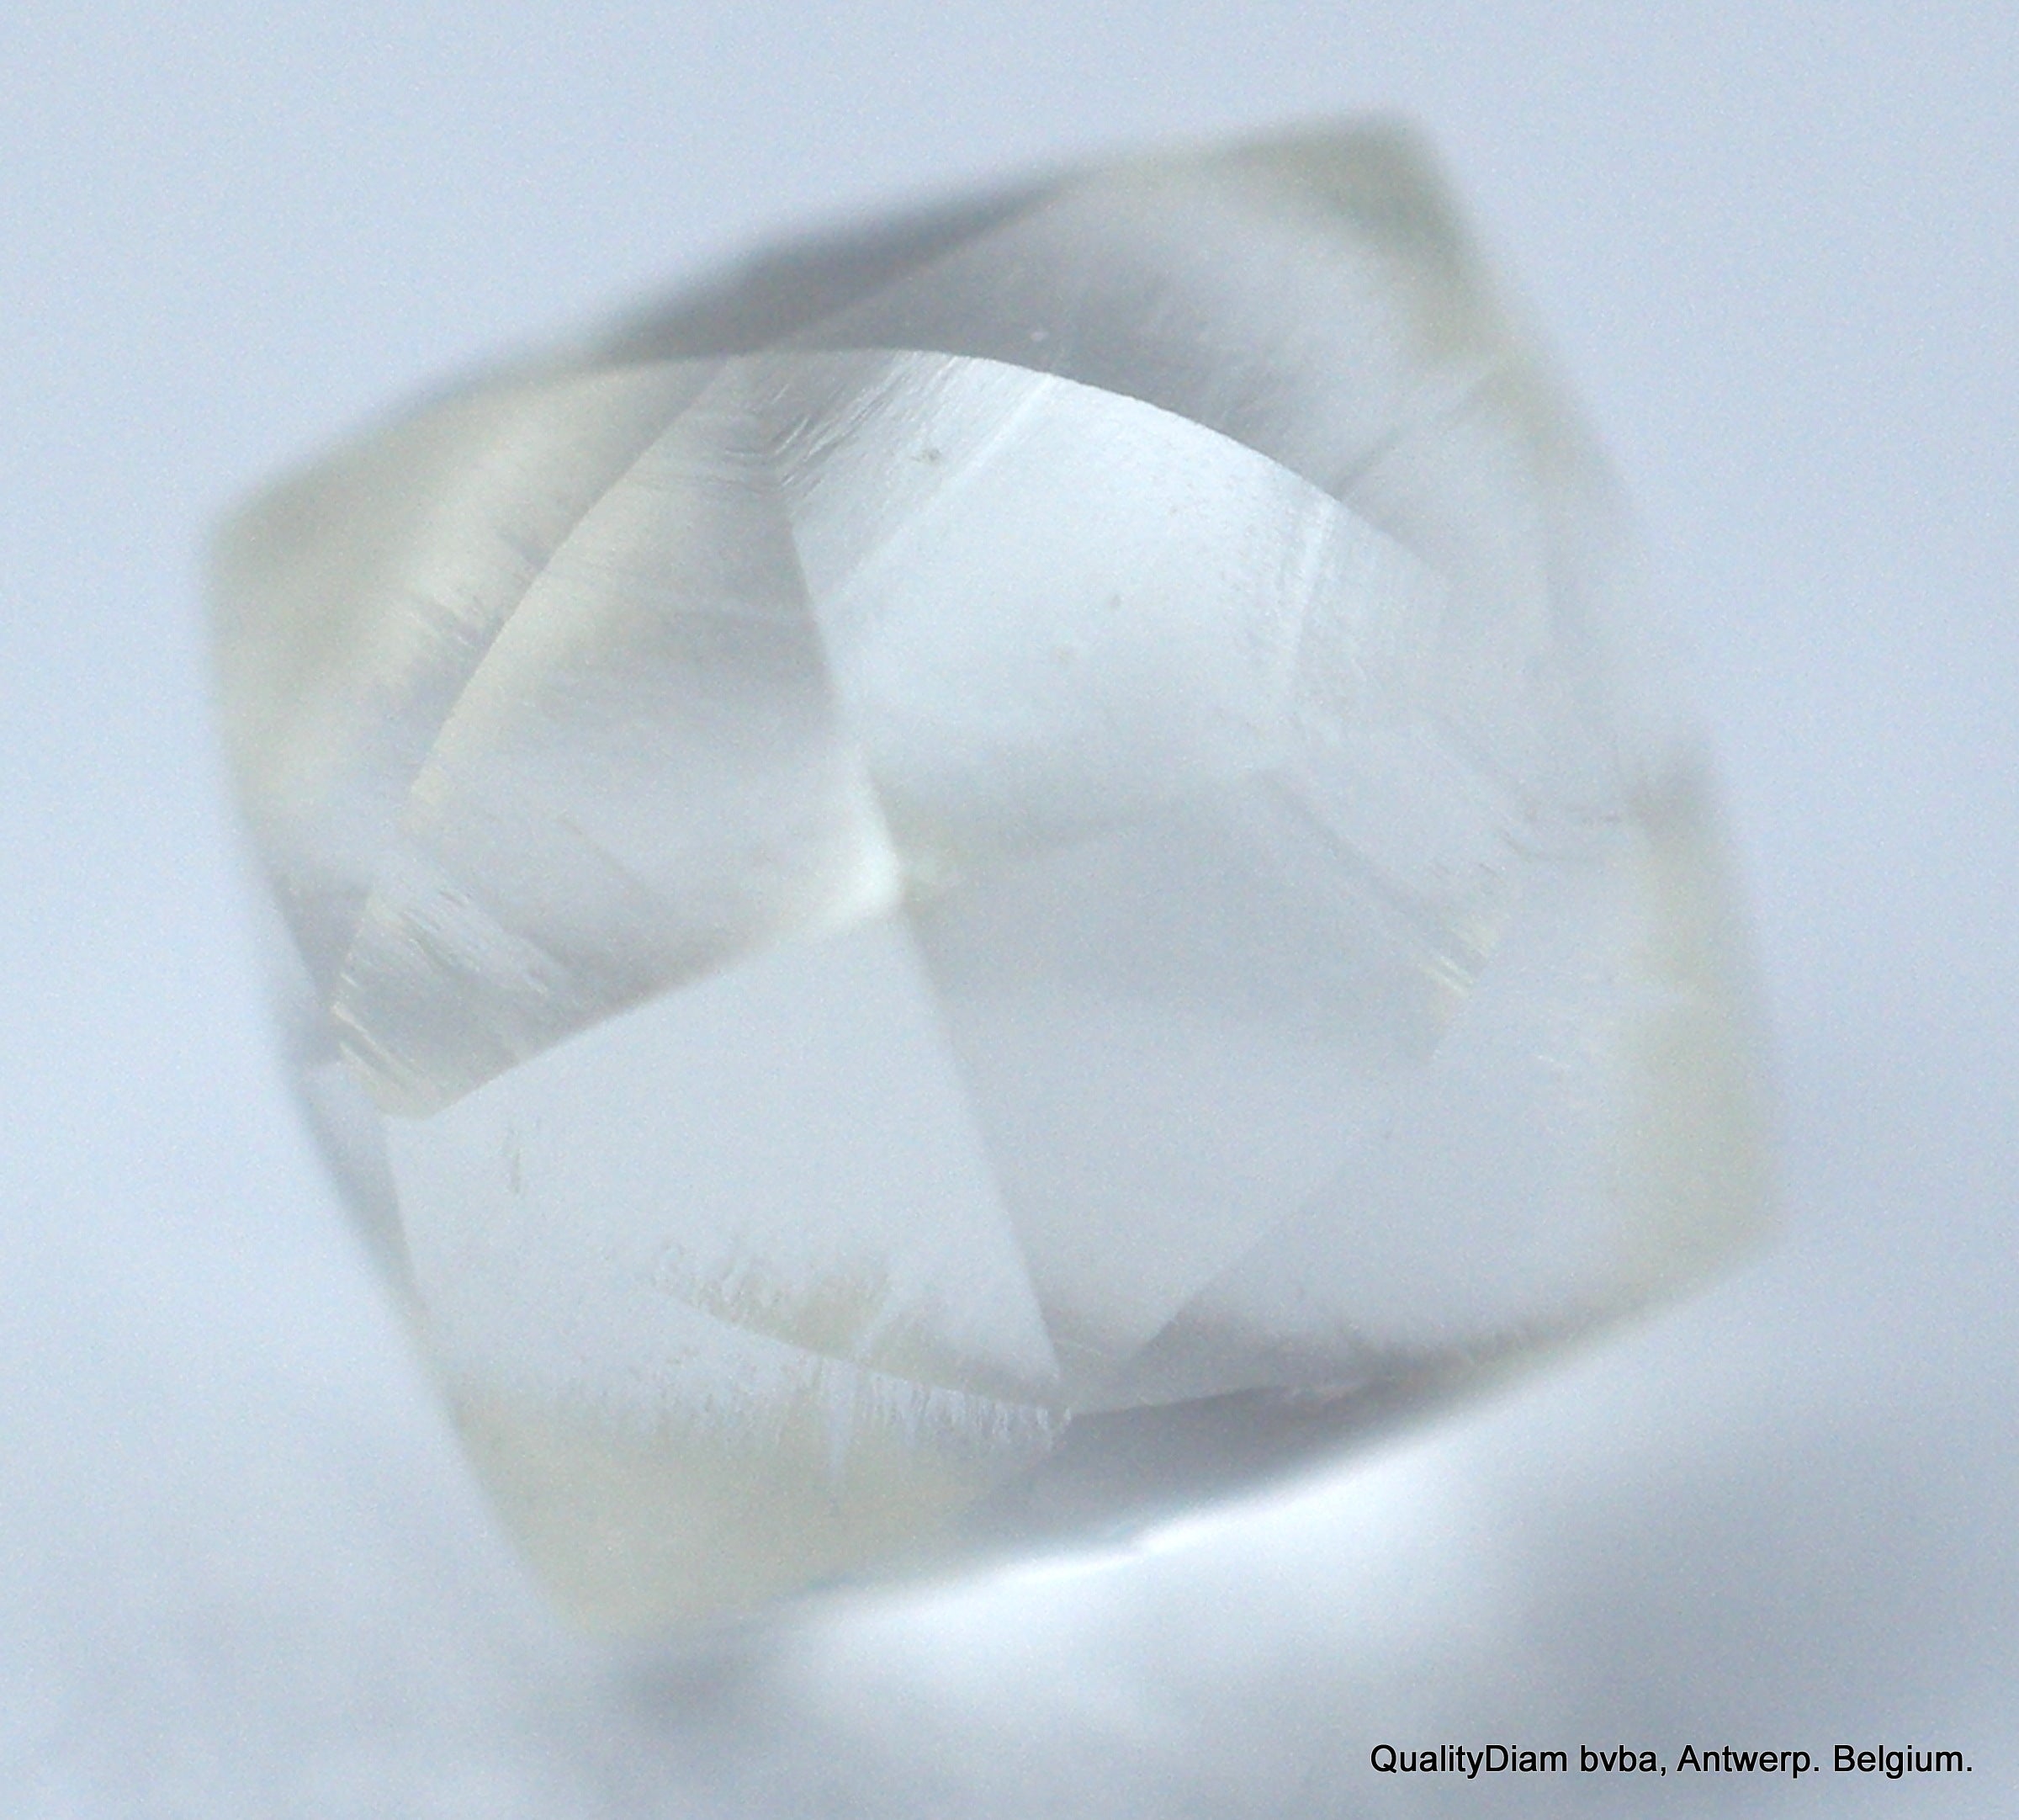 H Flawless Clean Diamond Out From Diamond Mine. High Value Gemstone Uncut Rough